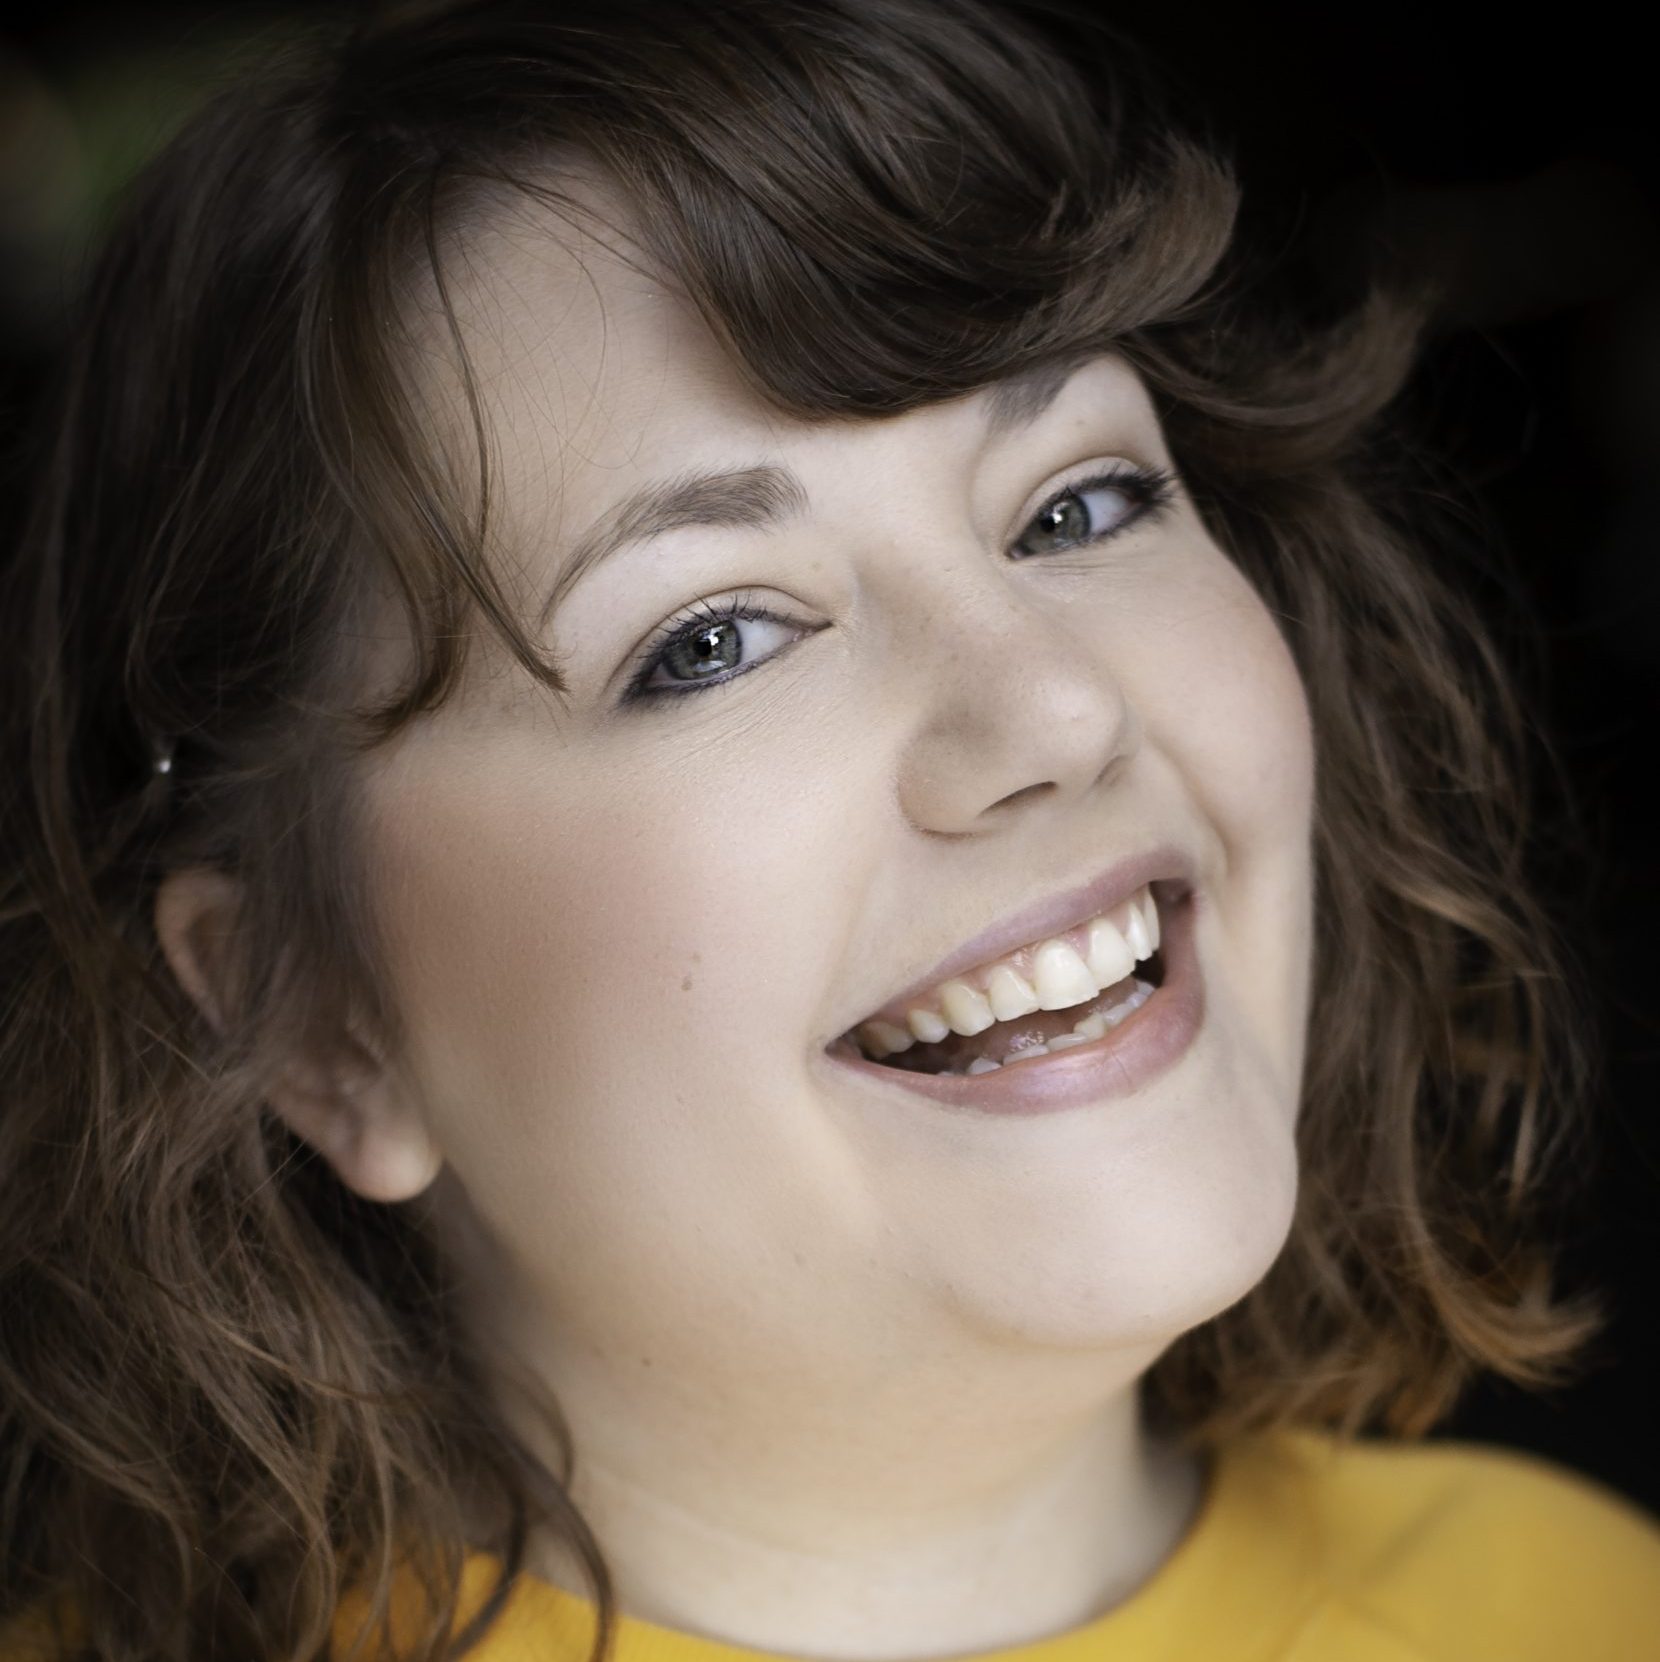 My acting headshot. Here I am smiling wearing a mustard yellow jumper.